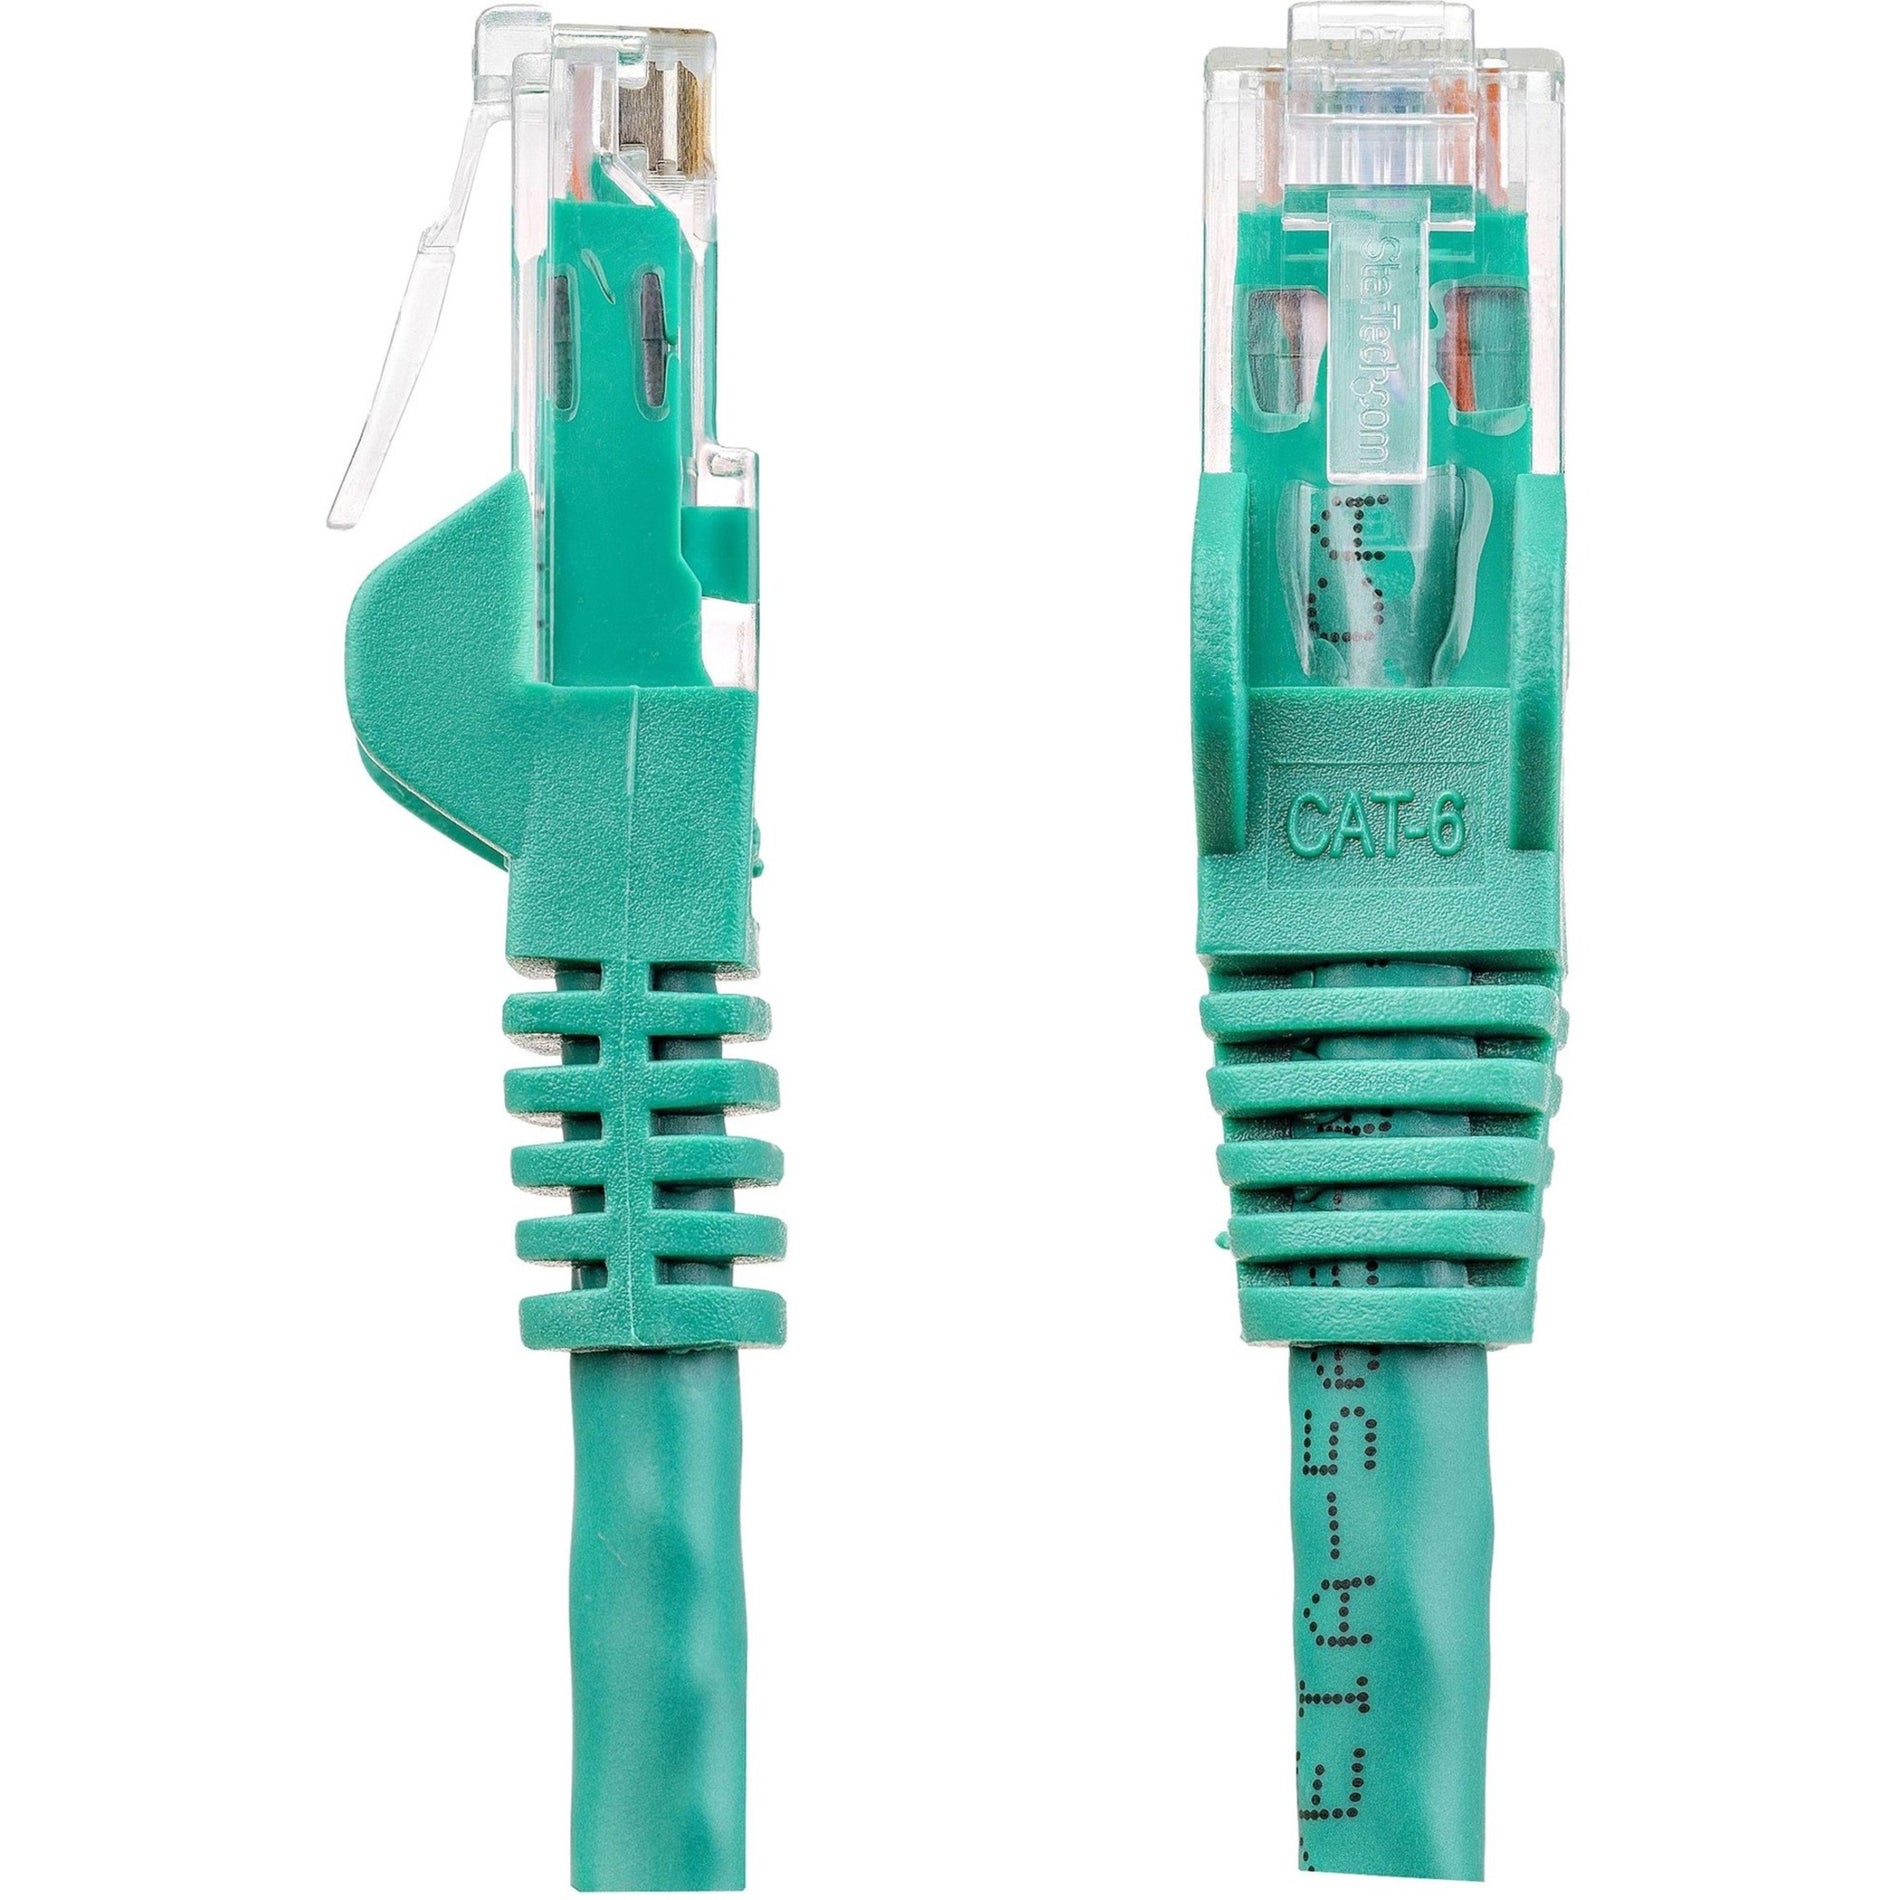 StarTech.com N6PATCH75GN 75 ft. Cat6 Patch Cable - Green, Lifetime Warranty, Gold Connectors, Snagless, CMG Rated